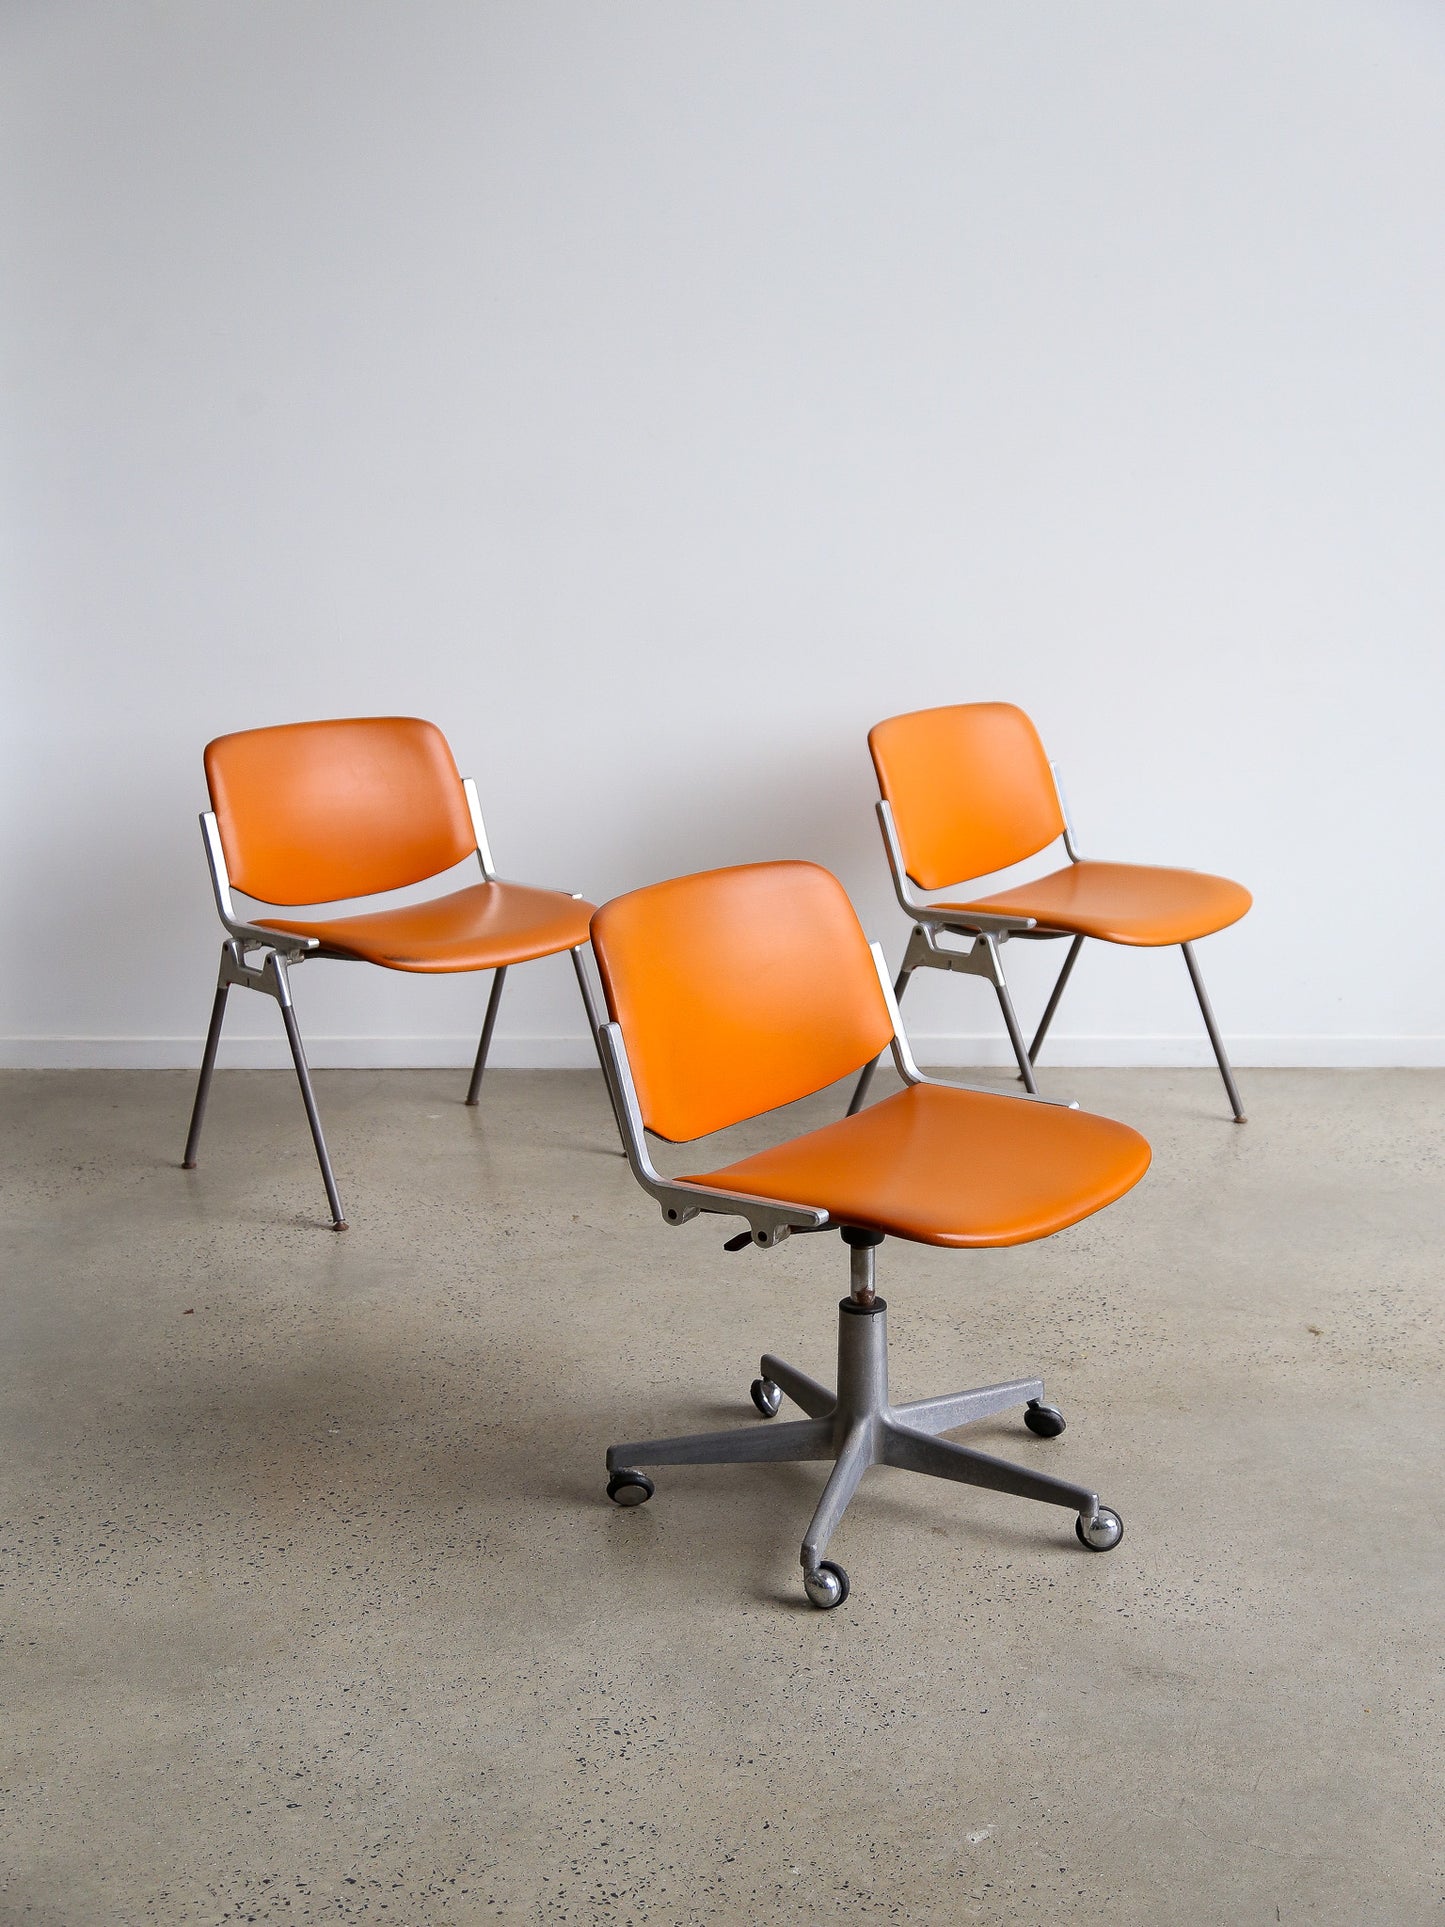 Set of Three DSC 106 Office chairs by Giancarlo Piretti for Castelli